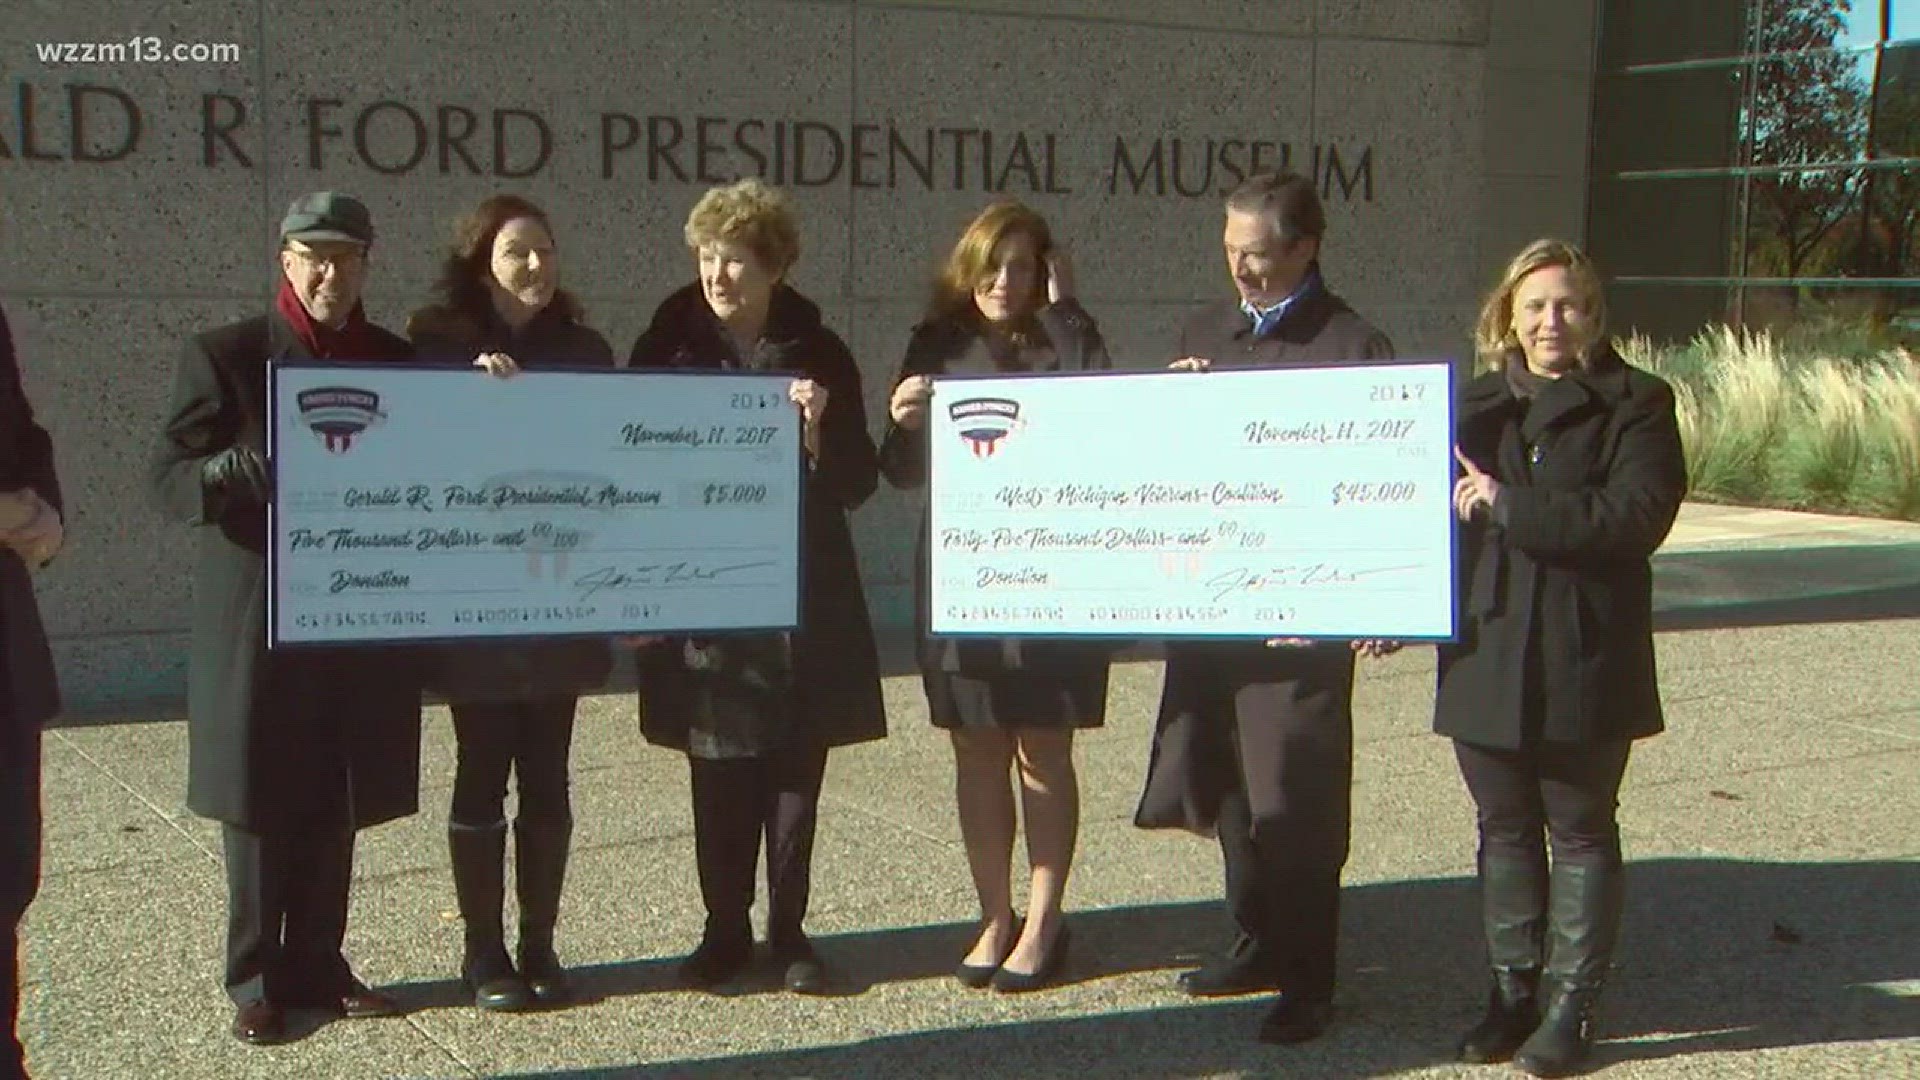 The West Michigan Veterans Coalition was given a check for $45,000.